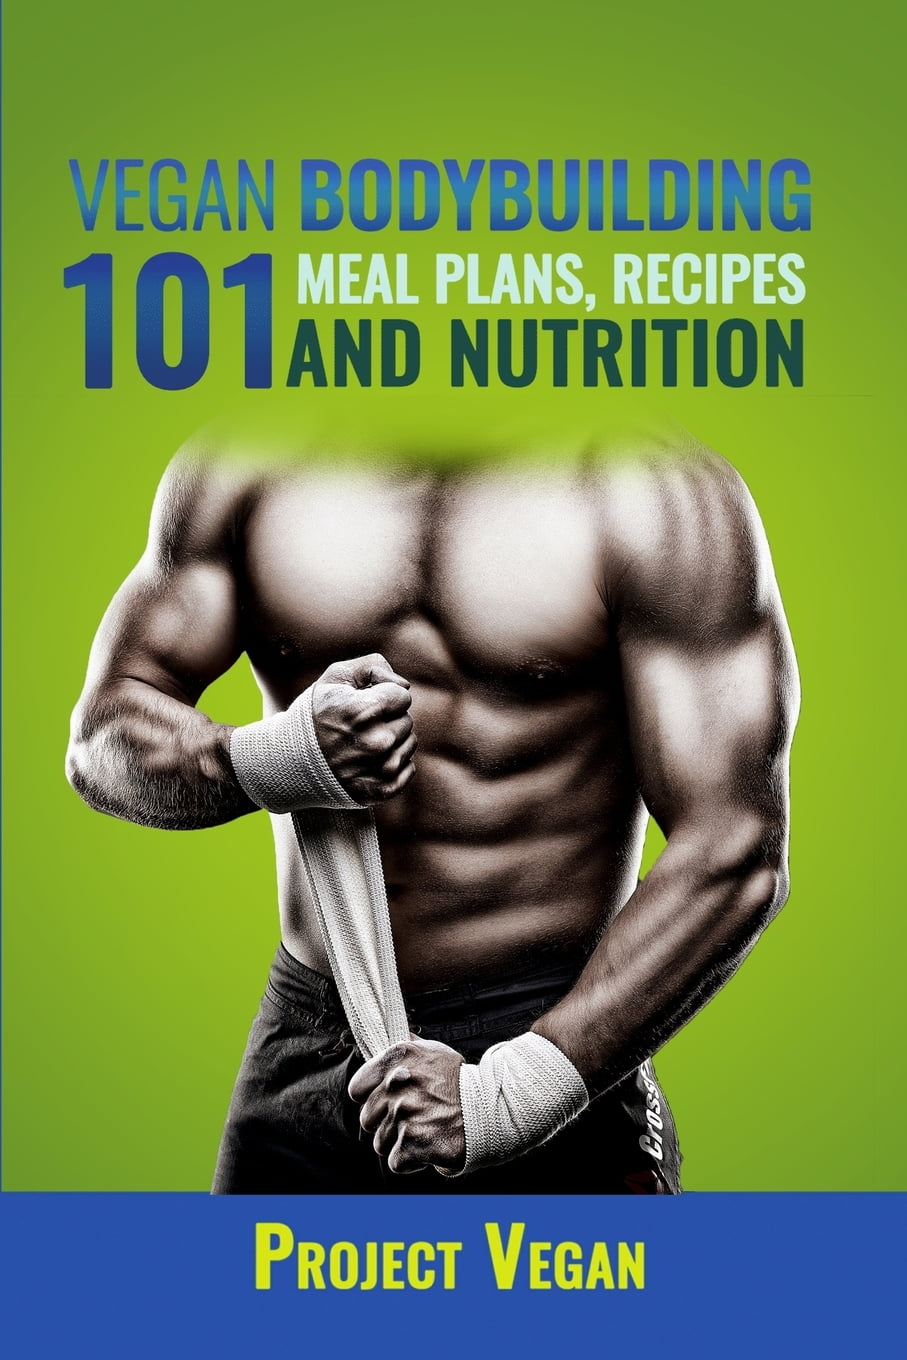 Vegan Bodybuilding 101 - Meal Plans, Recipes and Nutrition : A Guide to